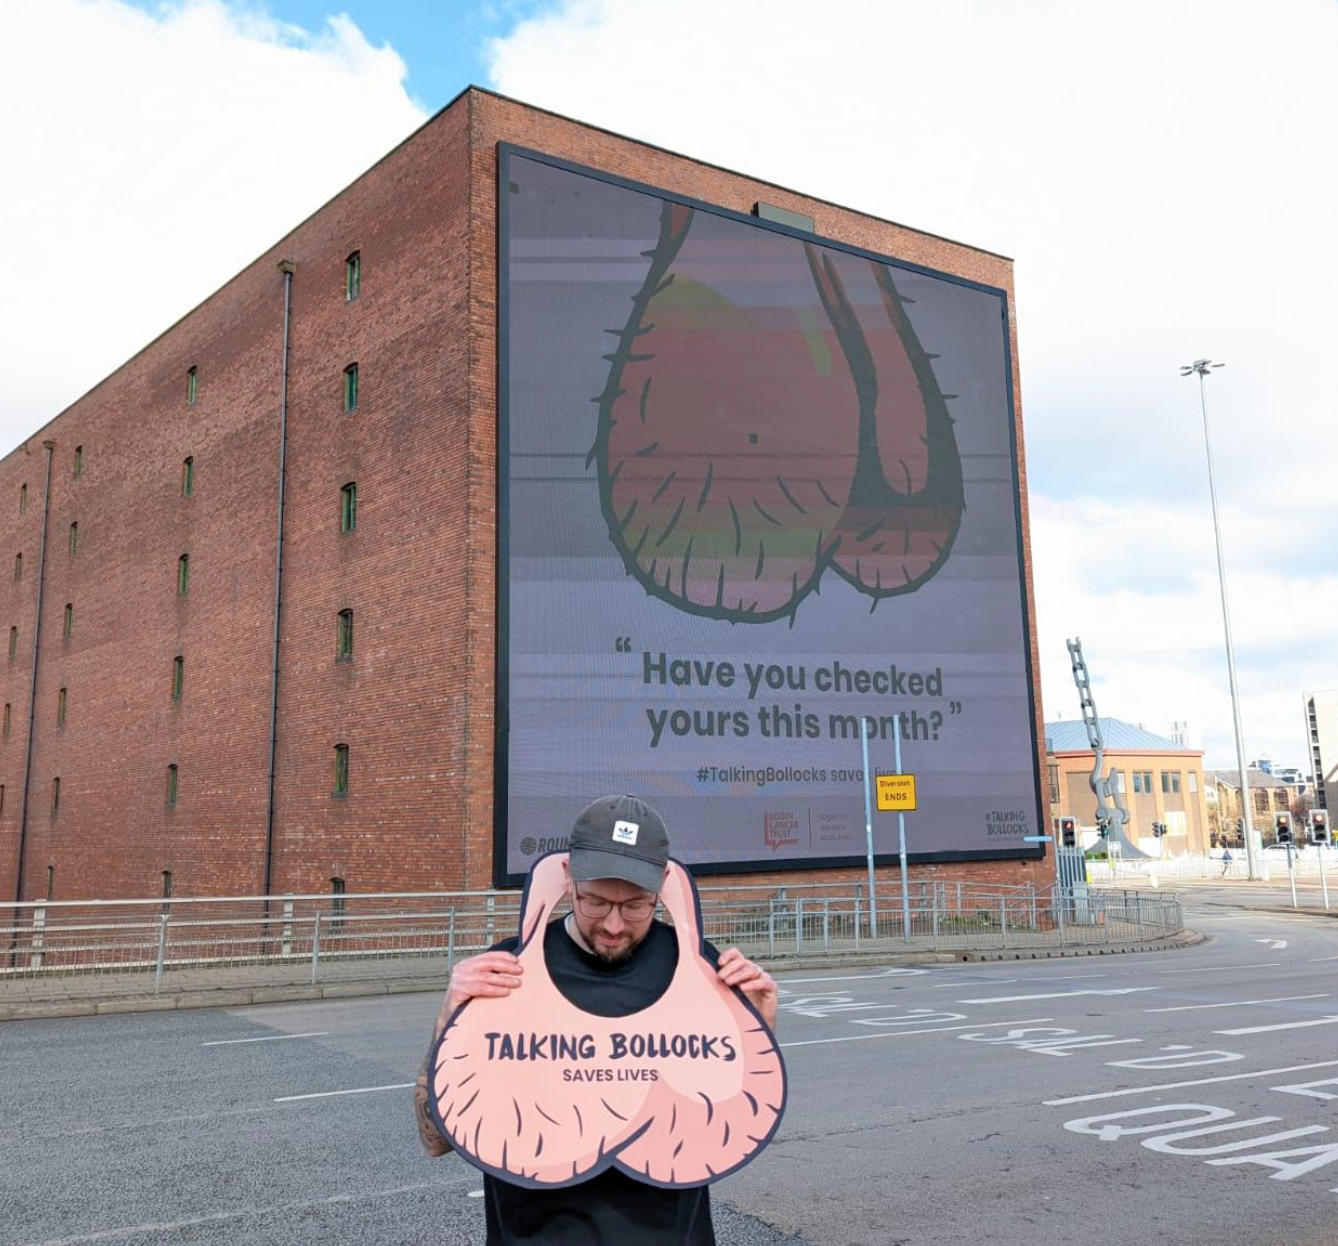 The UK&#8217;s &#8216;biggest balls&#8217; projected on Manchester billboard for testicular cancer awareness, The Manc